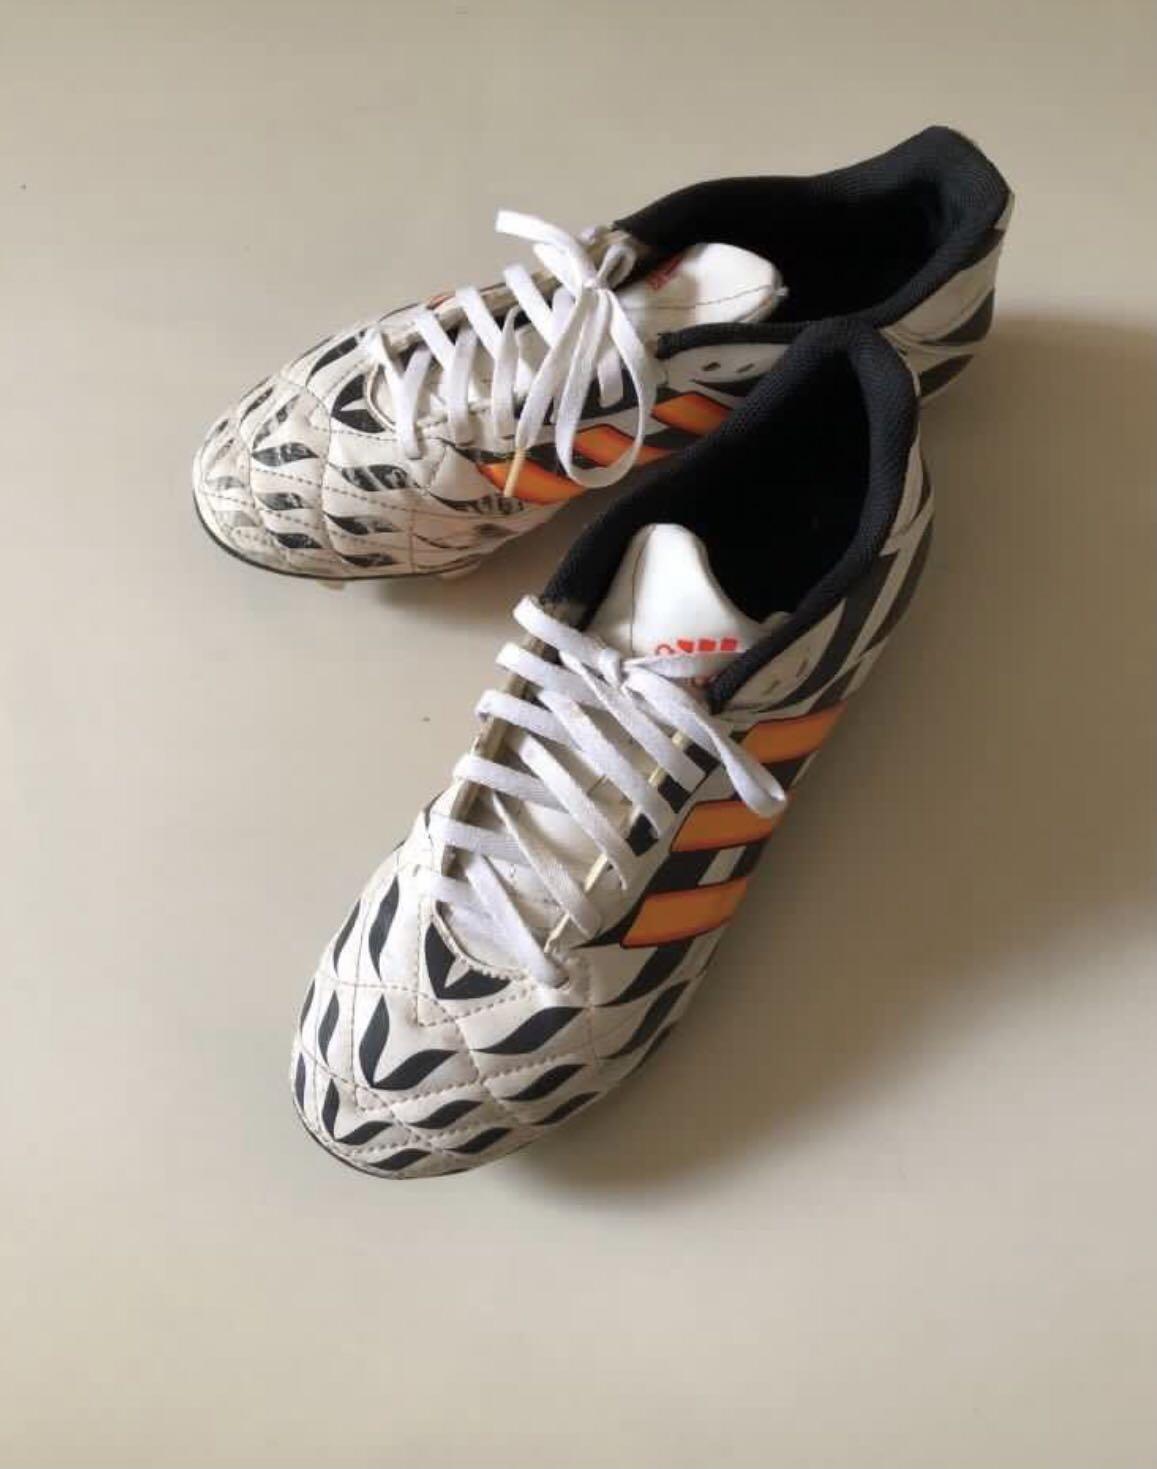 adidas world cup boots fg